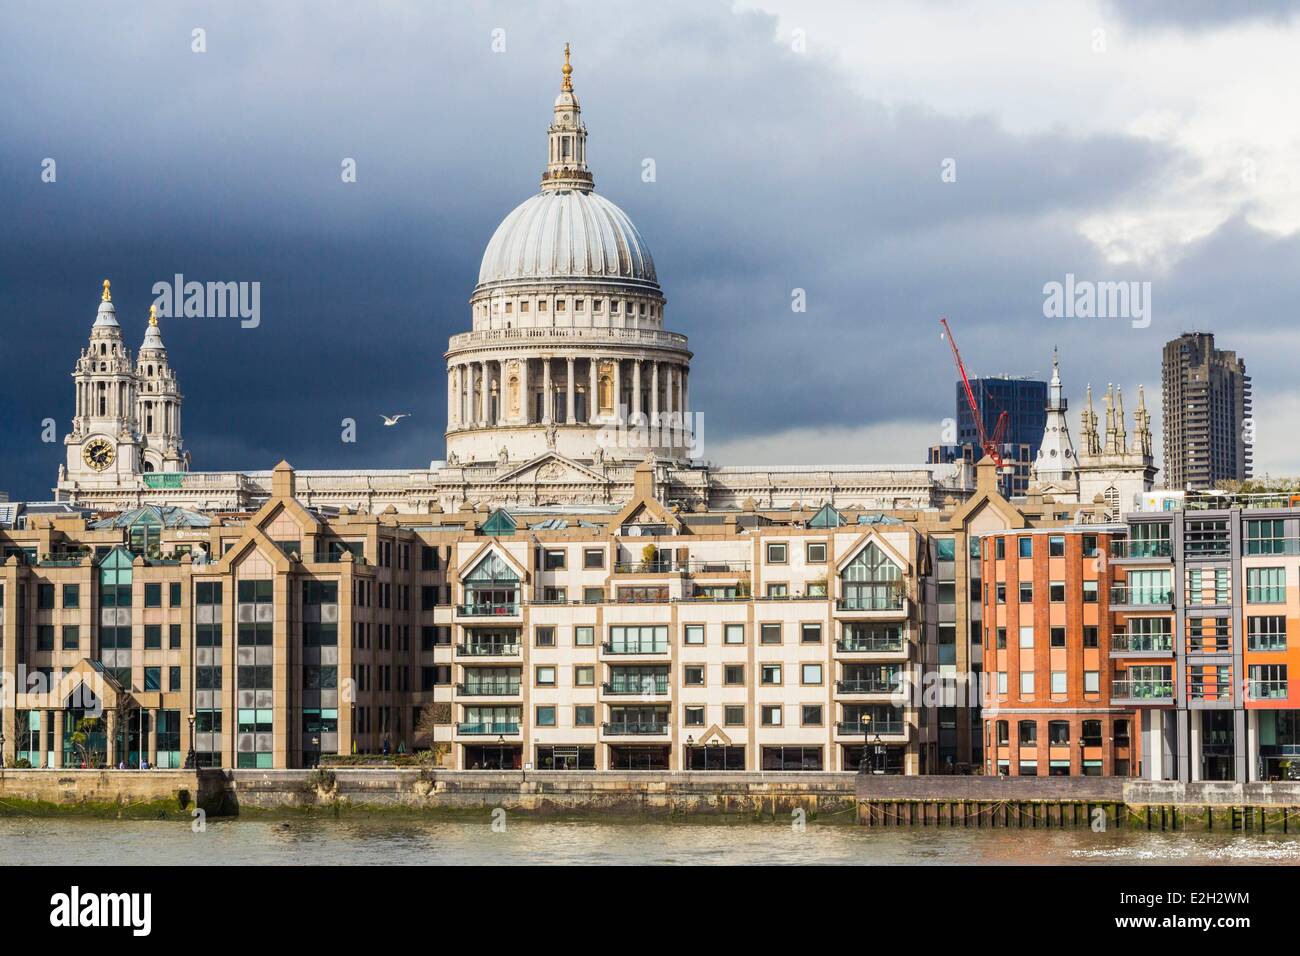 United Kingdom London City district with St. Paul's Cathedral designed by English architect Christopher Wren and completed in 1710 Stock Photo